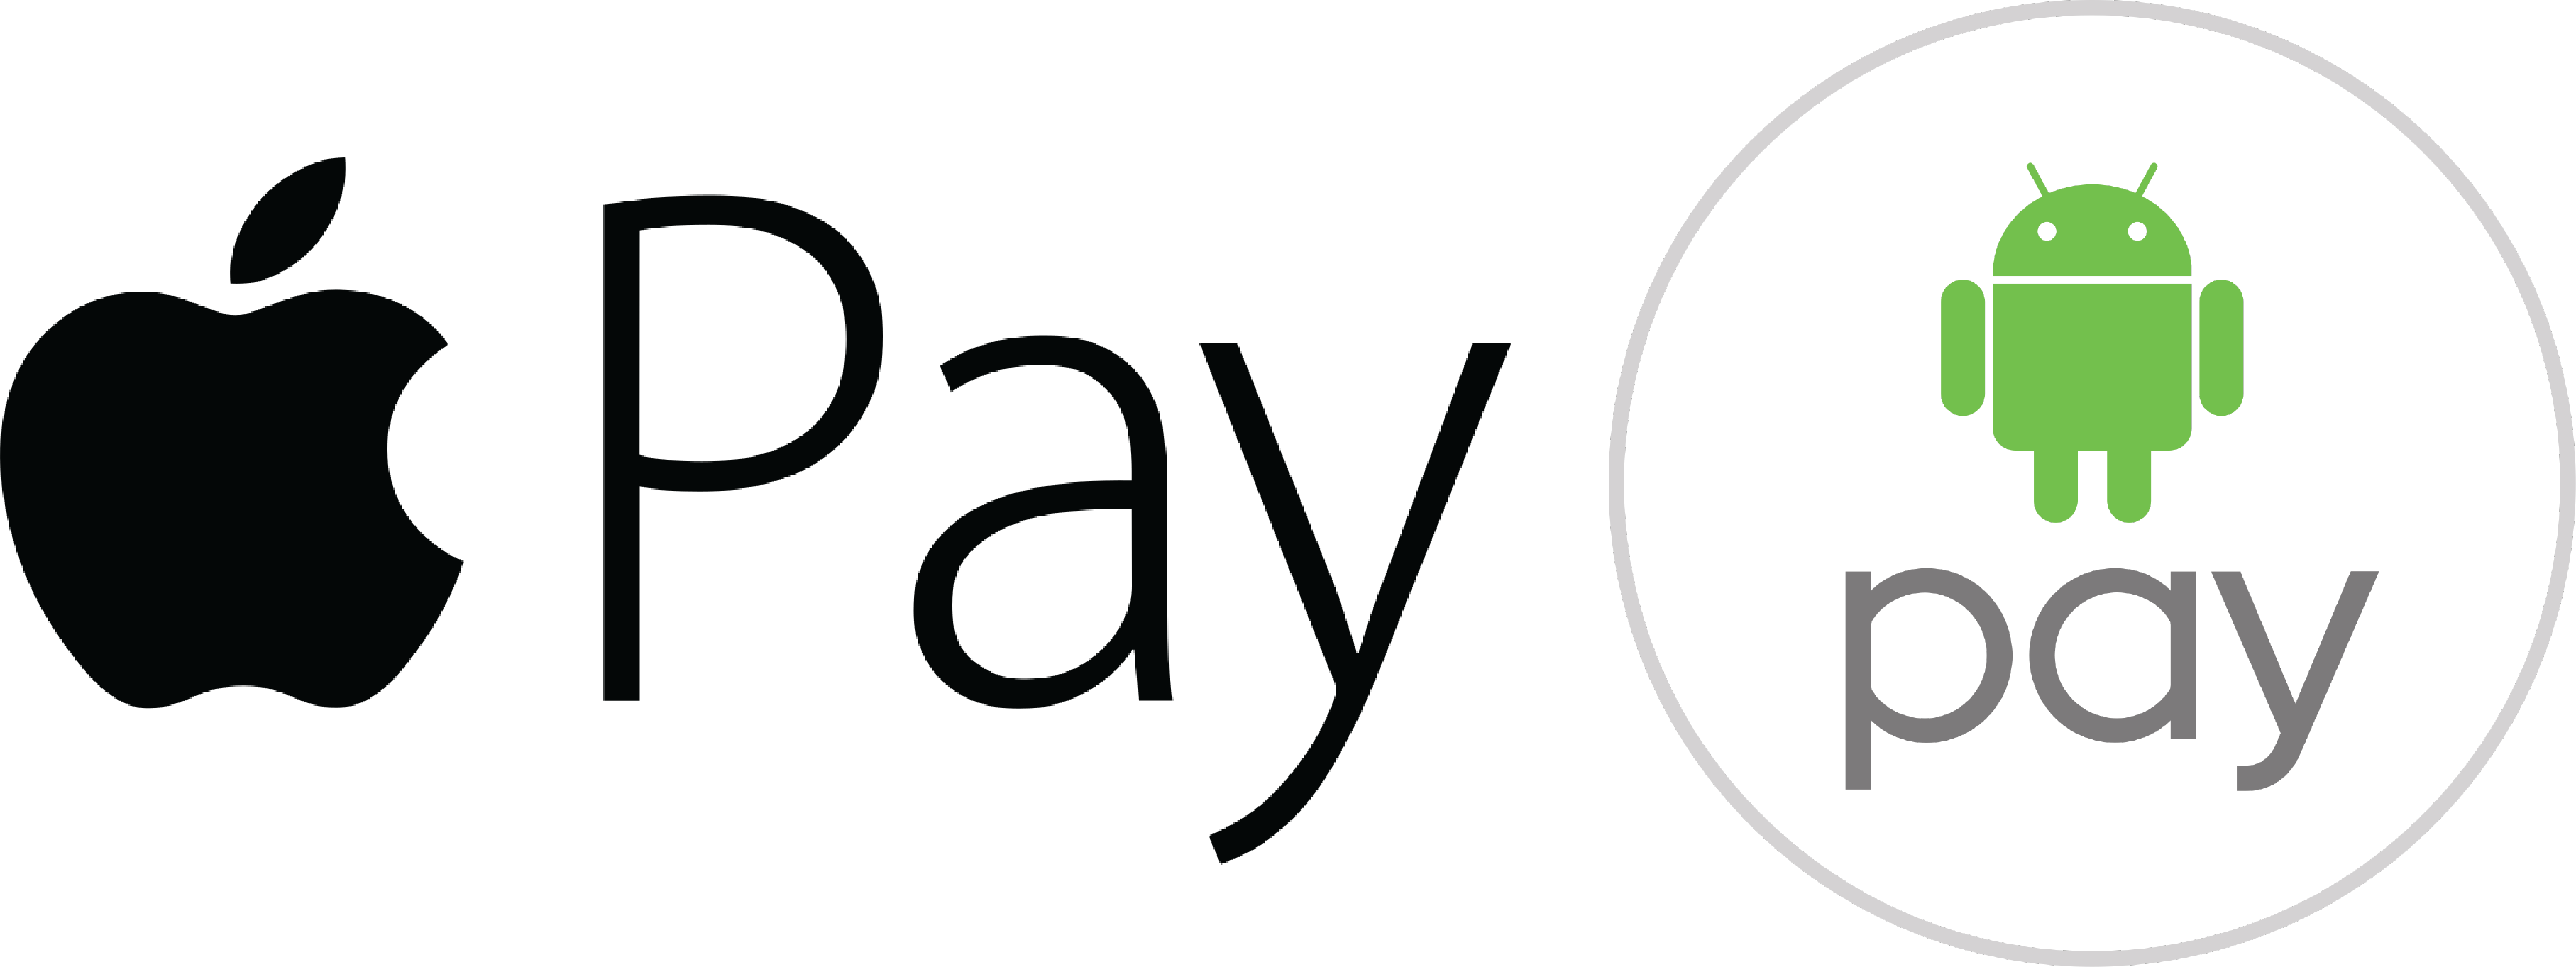 Download Apple Pay Png Clip Art Black And White Apple Pay Svg Png Image With No Background Pngkey Com